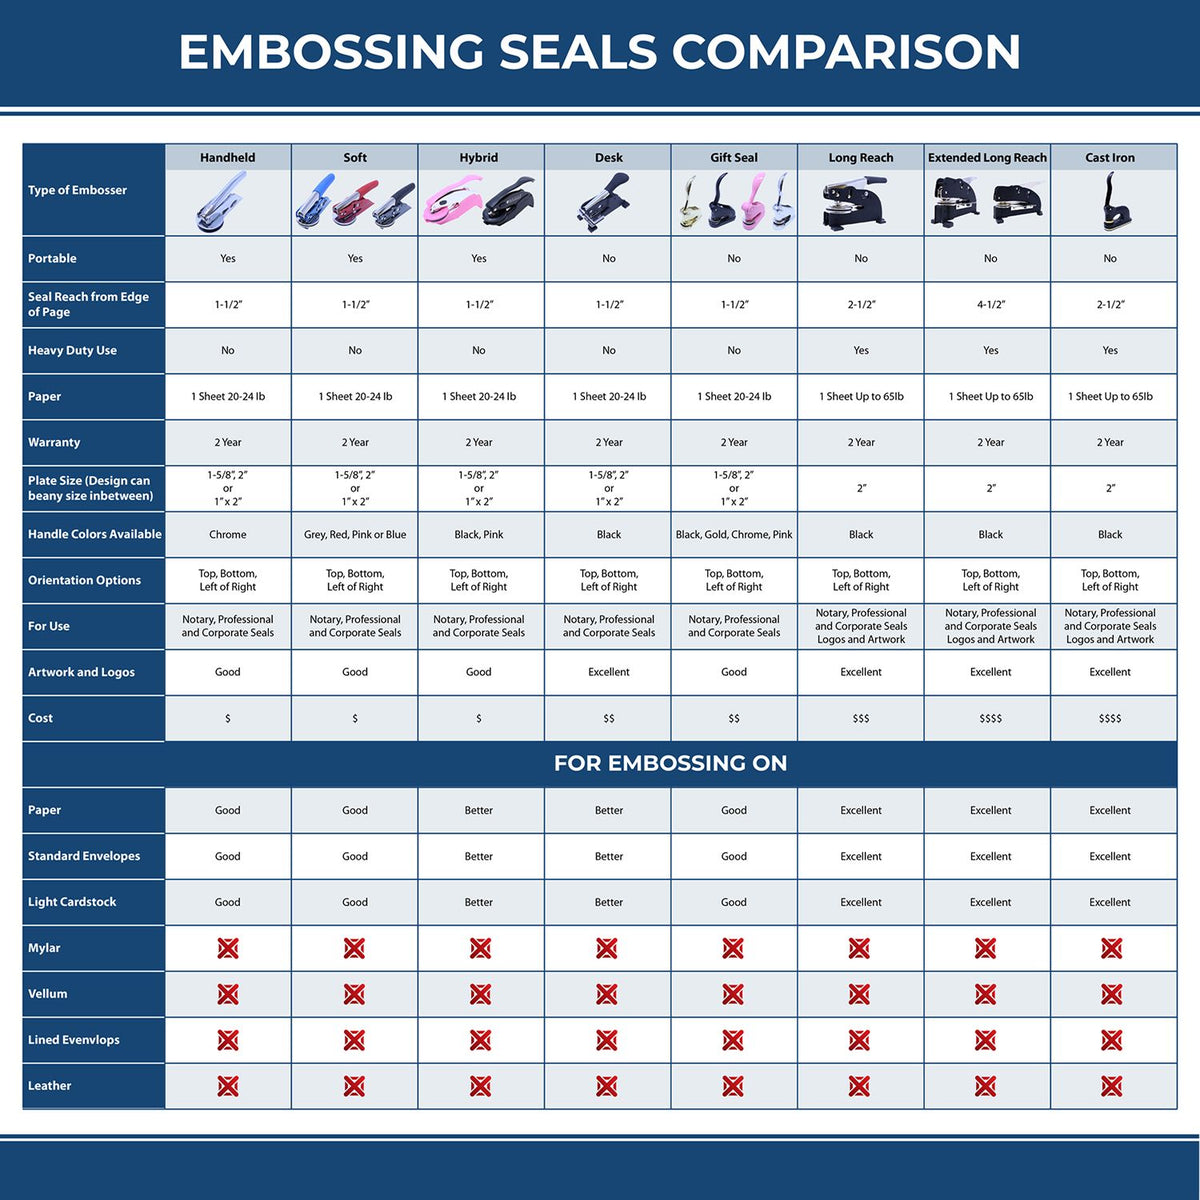 A comparison chart for the different types of mount models available for the Gift Hawaii Land Surveyor Seal